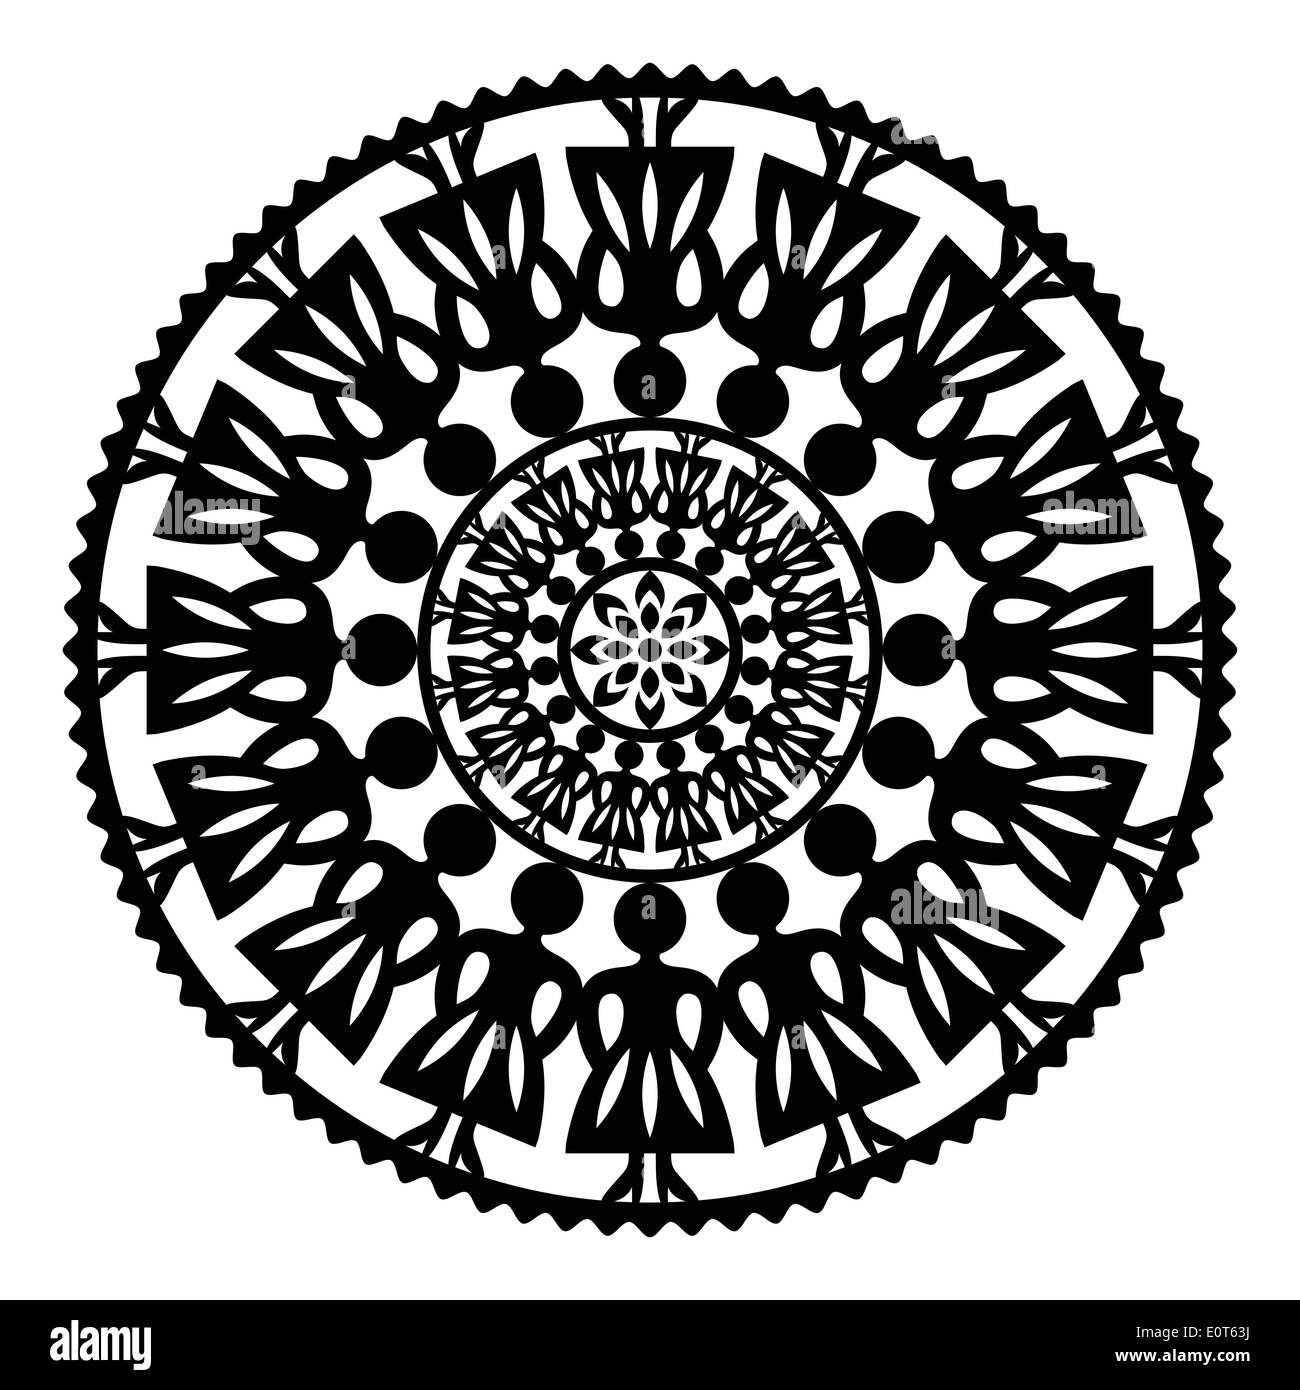 Polish traditional folk art pattern in circle with women - wzory lowickie, wycinanki  Decorative vector pattern - paper cutouts style isolated on whit Stock Vector